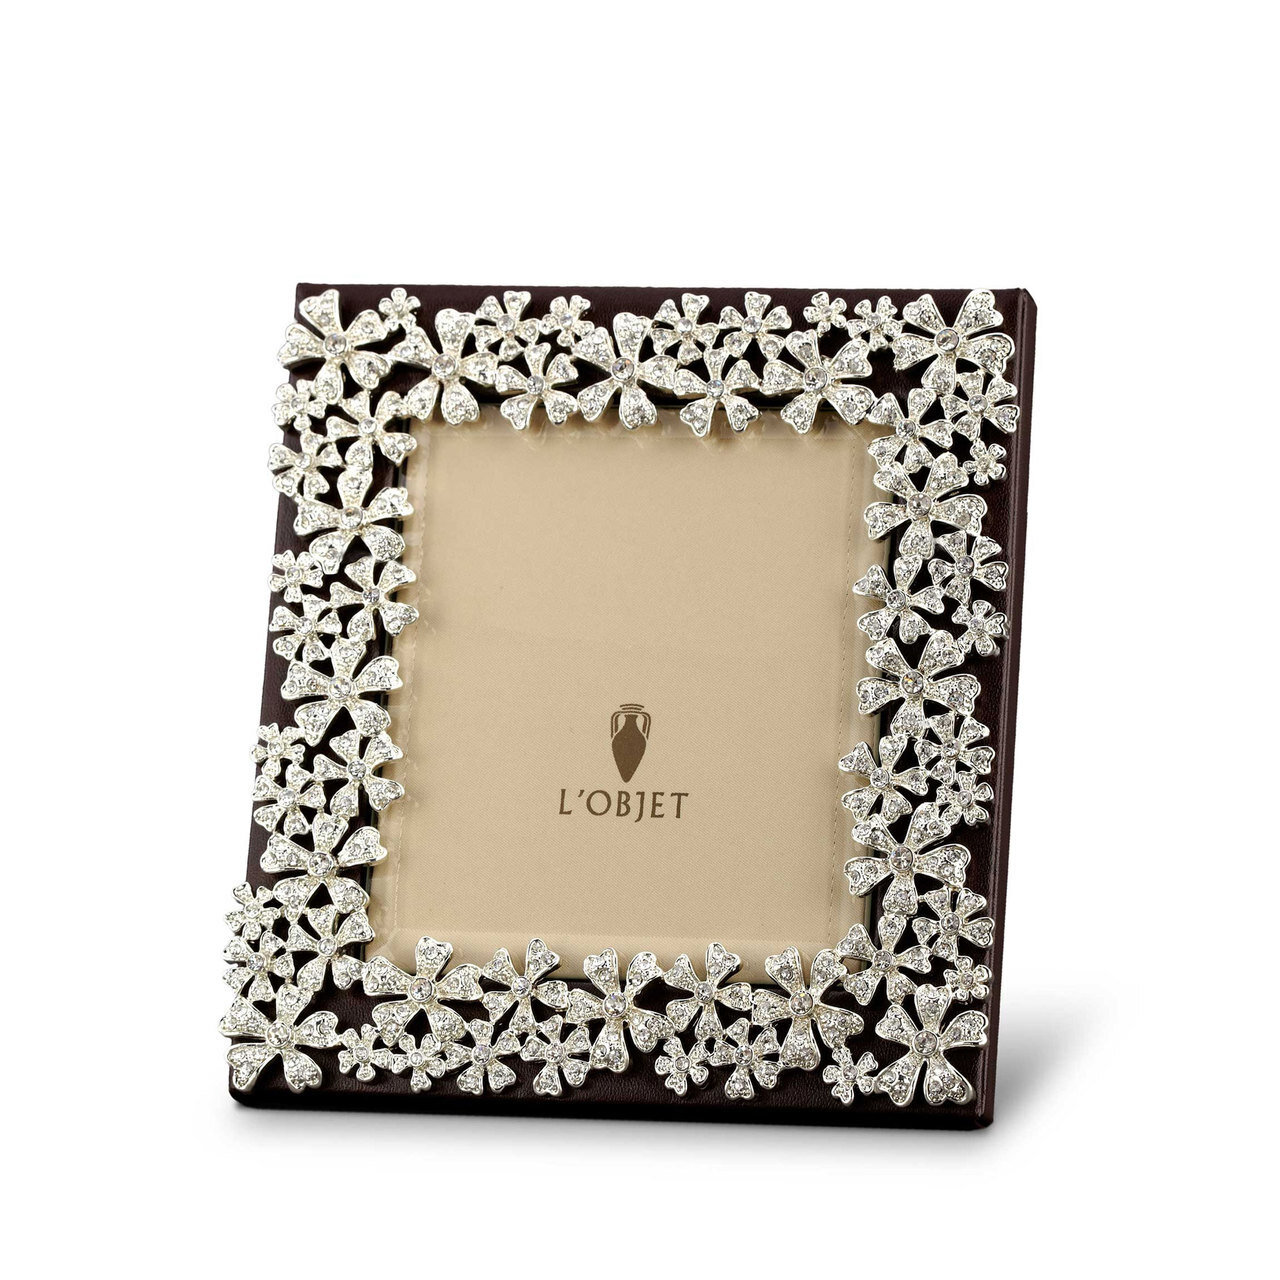 L'Objet Garland 5 x 5 Inch Platinum with White Crystals Picture Frame